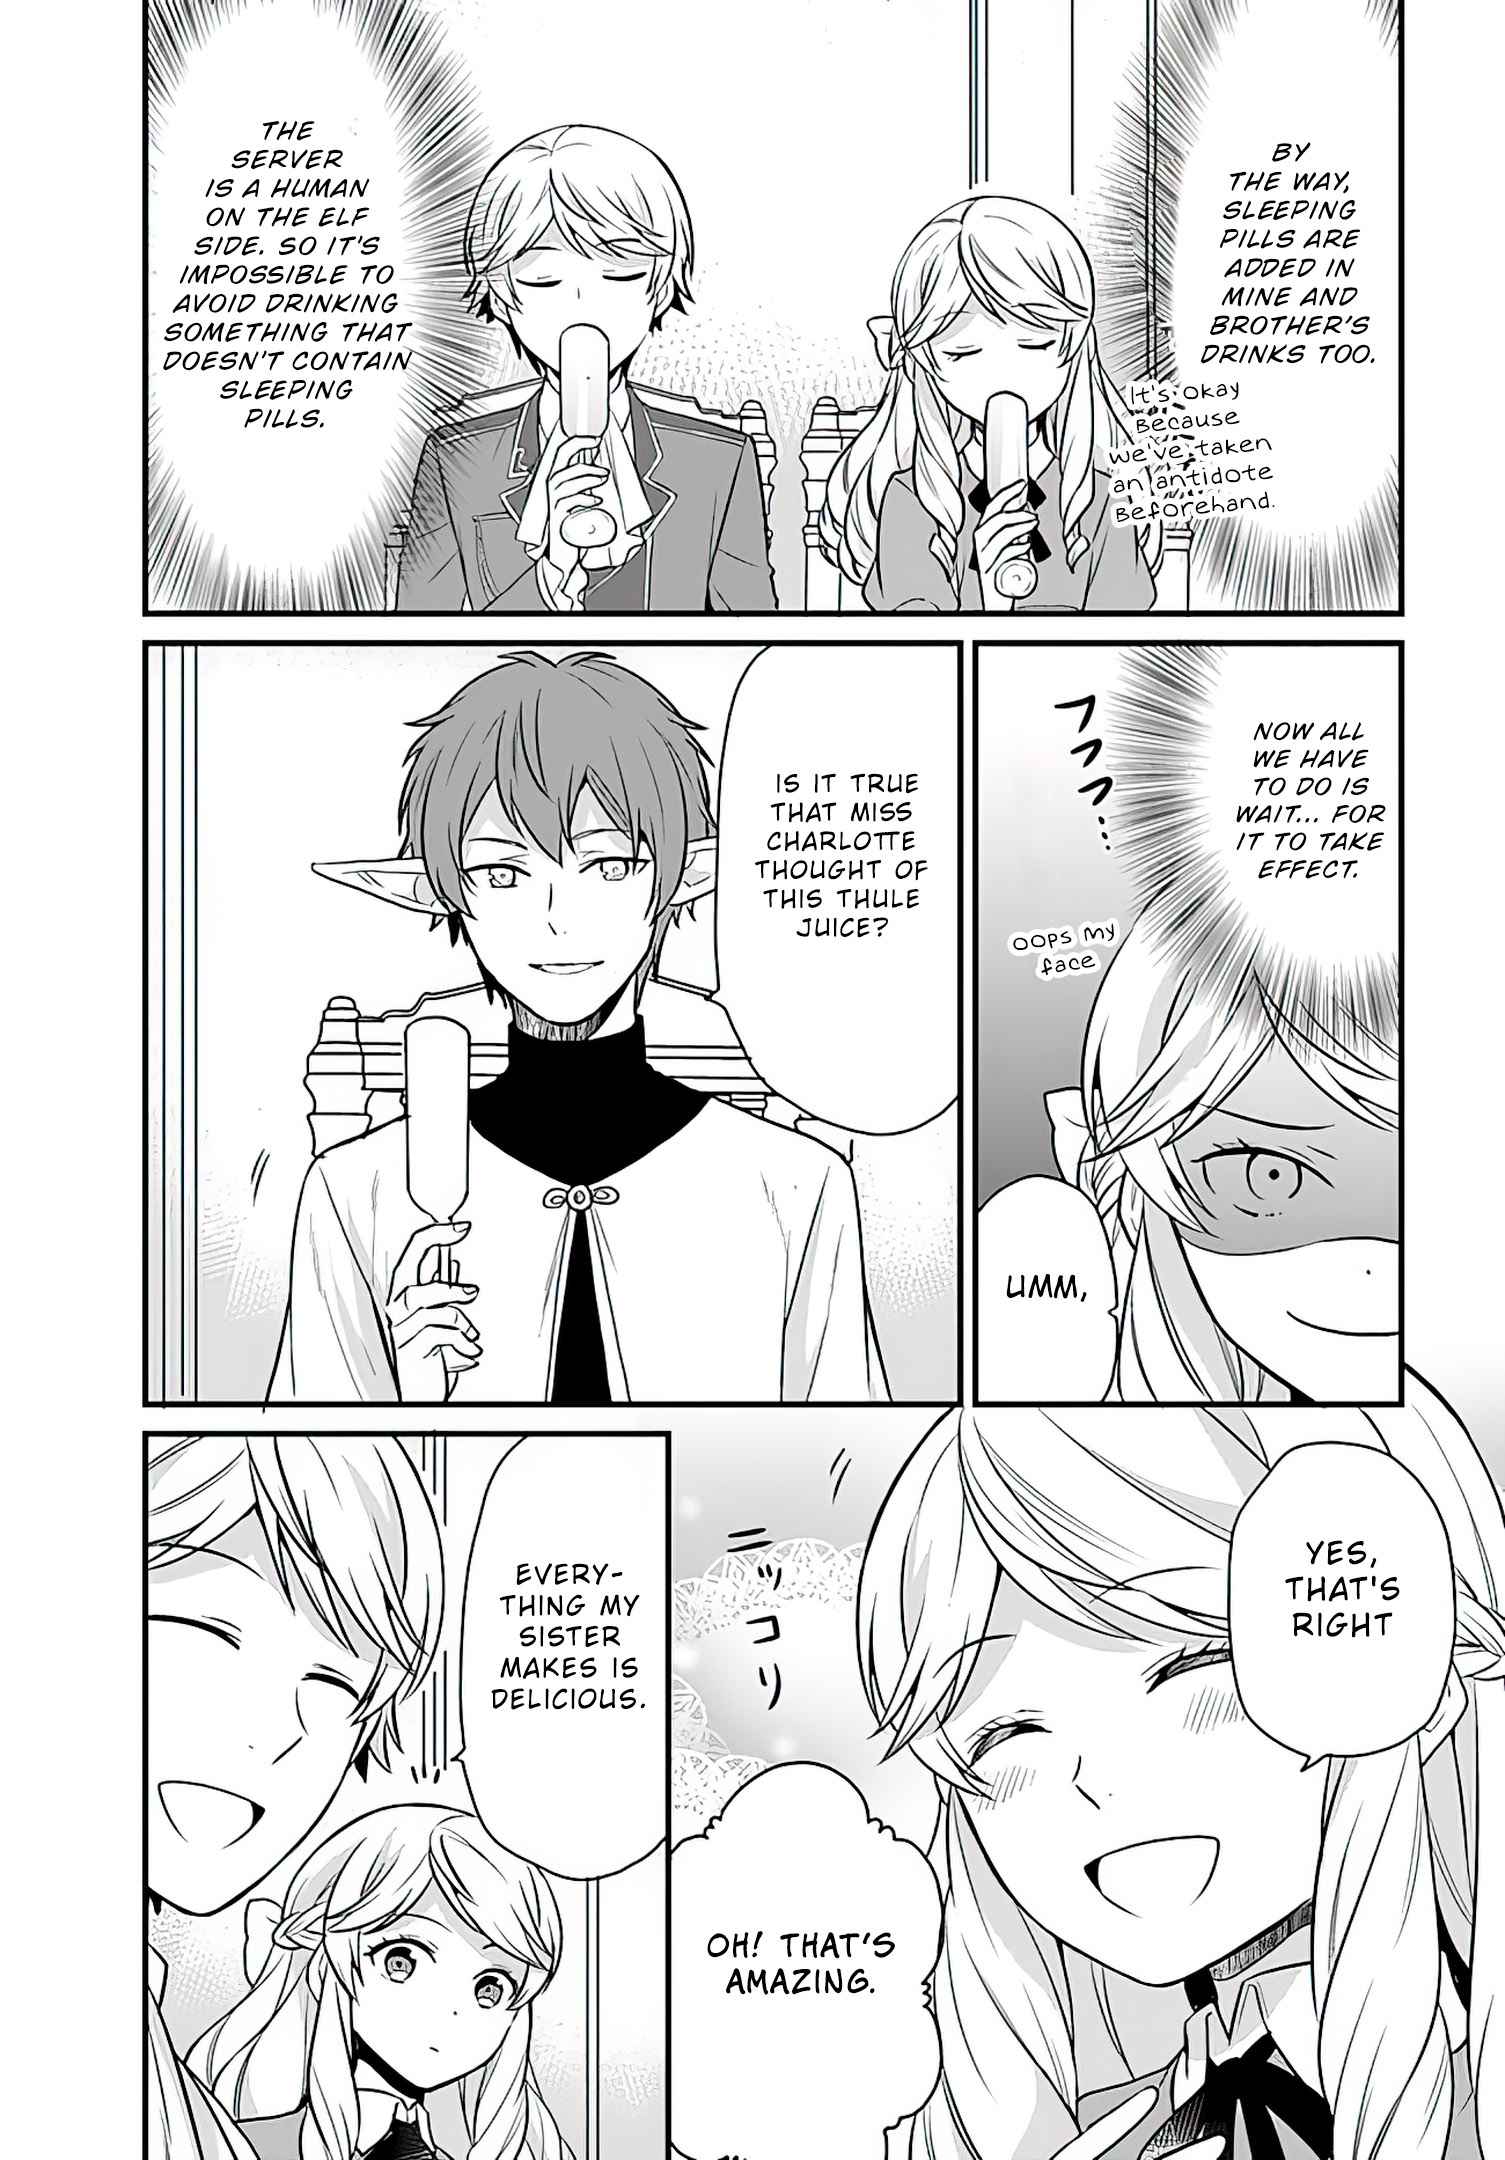 Because Of Her Love For Sake, The Otome Game Setting Was Broken And The Villainous Noblewoman Became The Noblewoman With Cheats - 12 page 18-e02831da